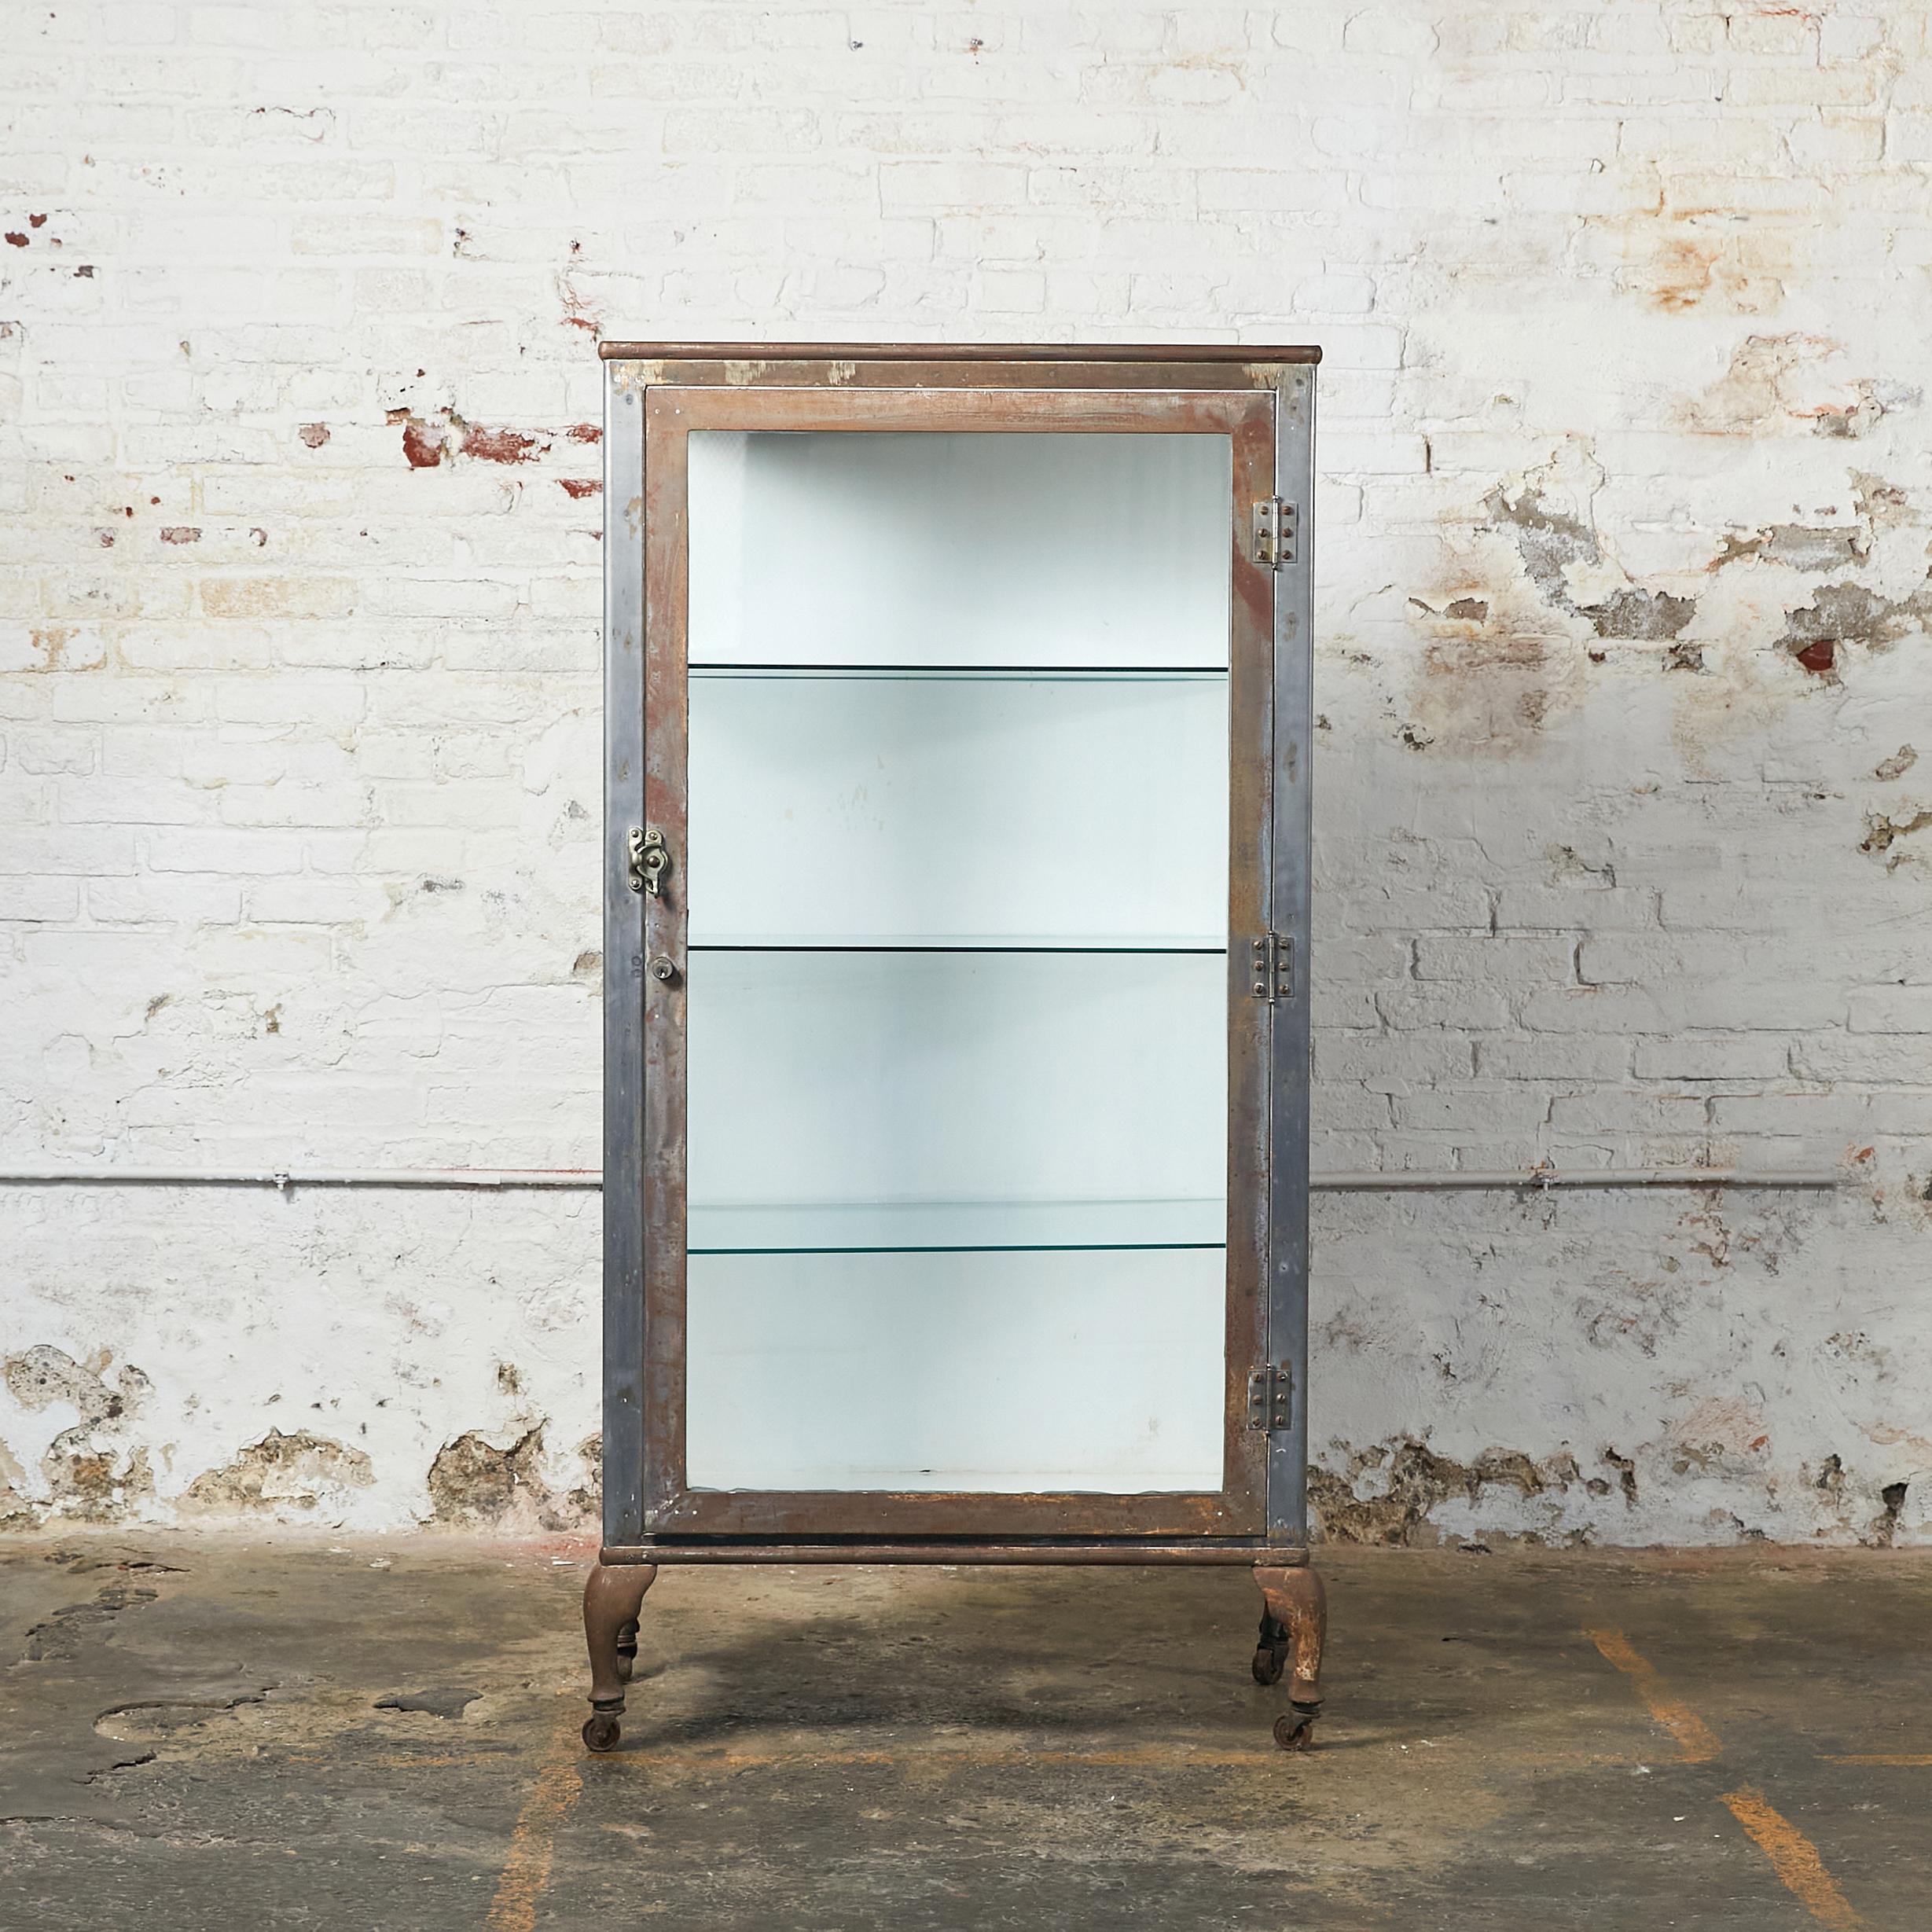 Tall industrial medicine cabinet. Metal frame door with clear glass and sides with ribbed glass inserts. The interior back and base are painted in white, and the shelves are made of glass. The cabinet rests on four curved shape metal legs with